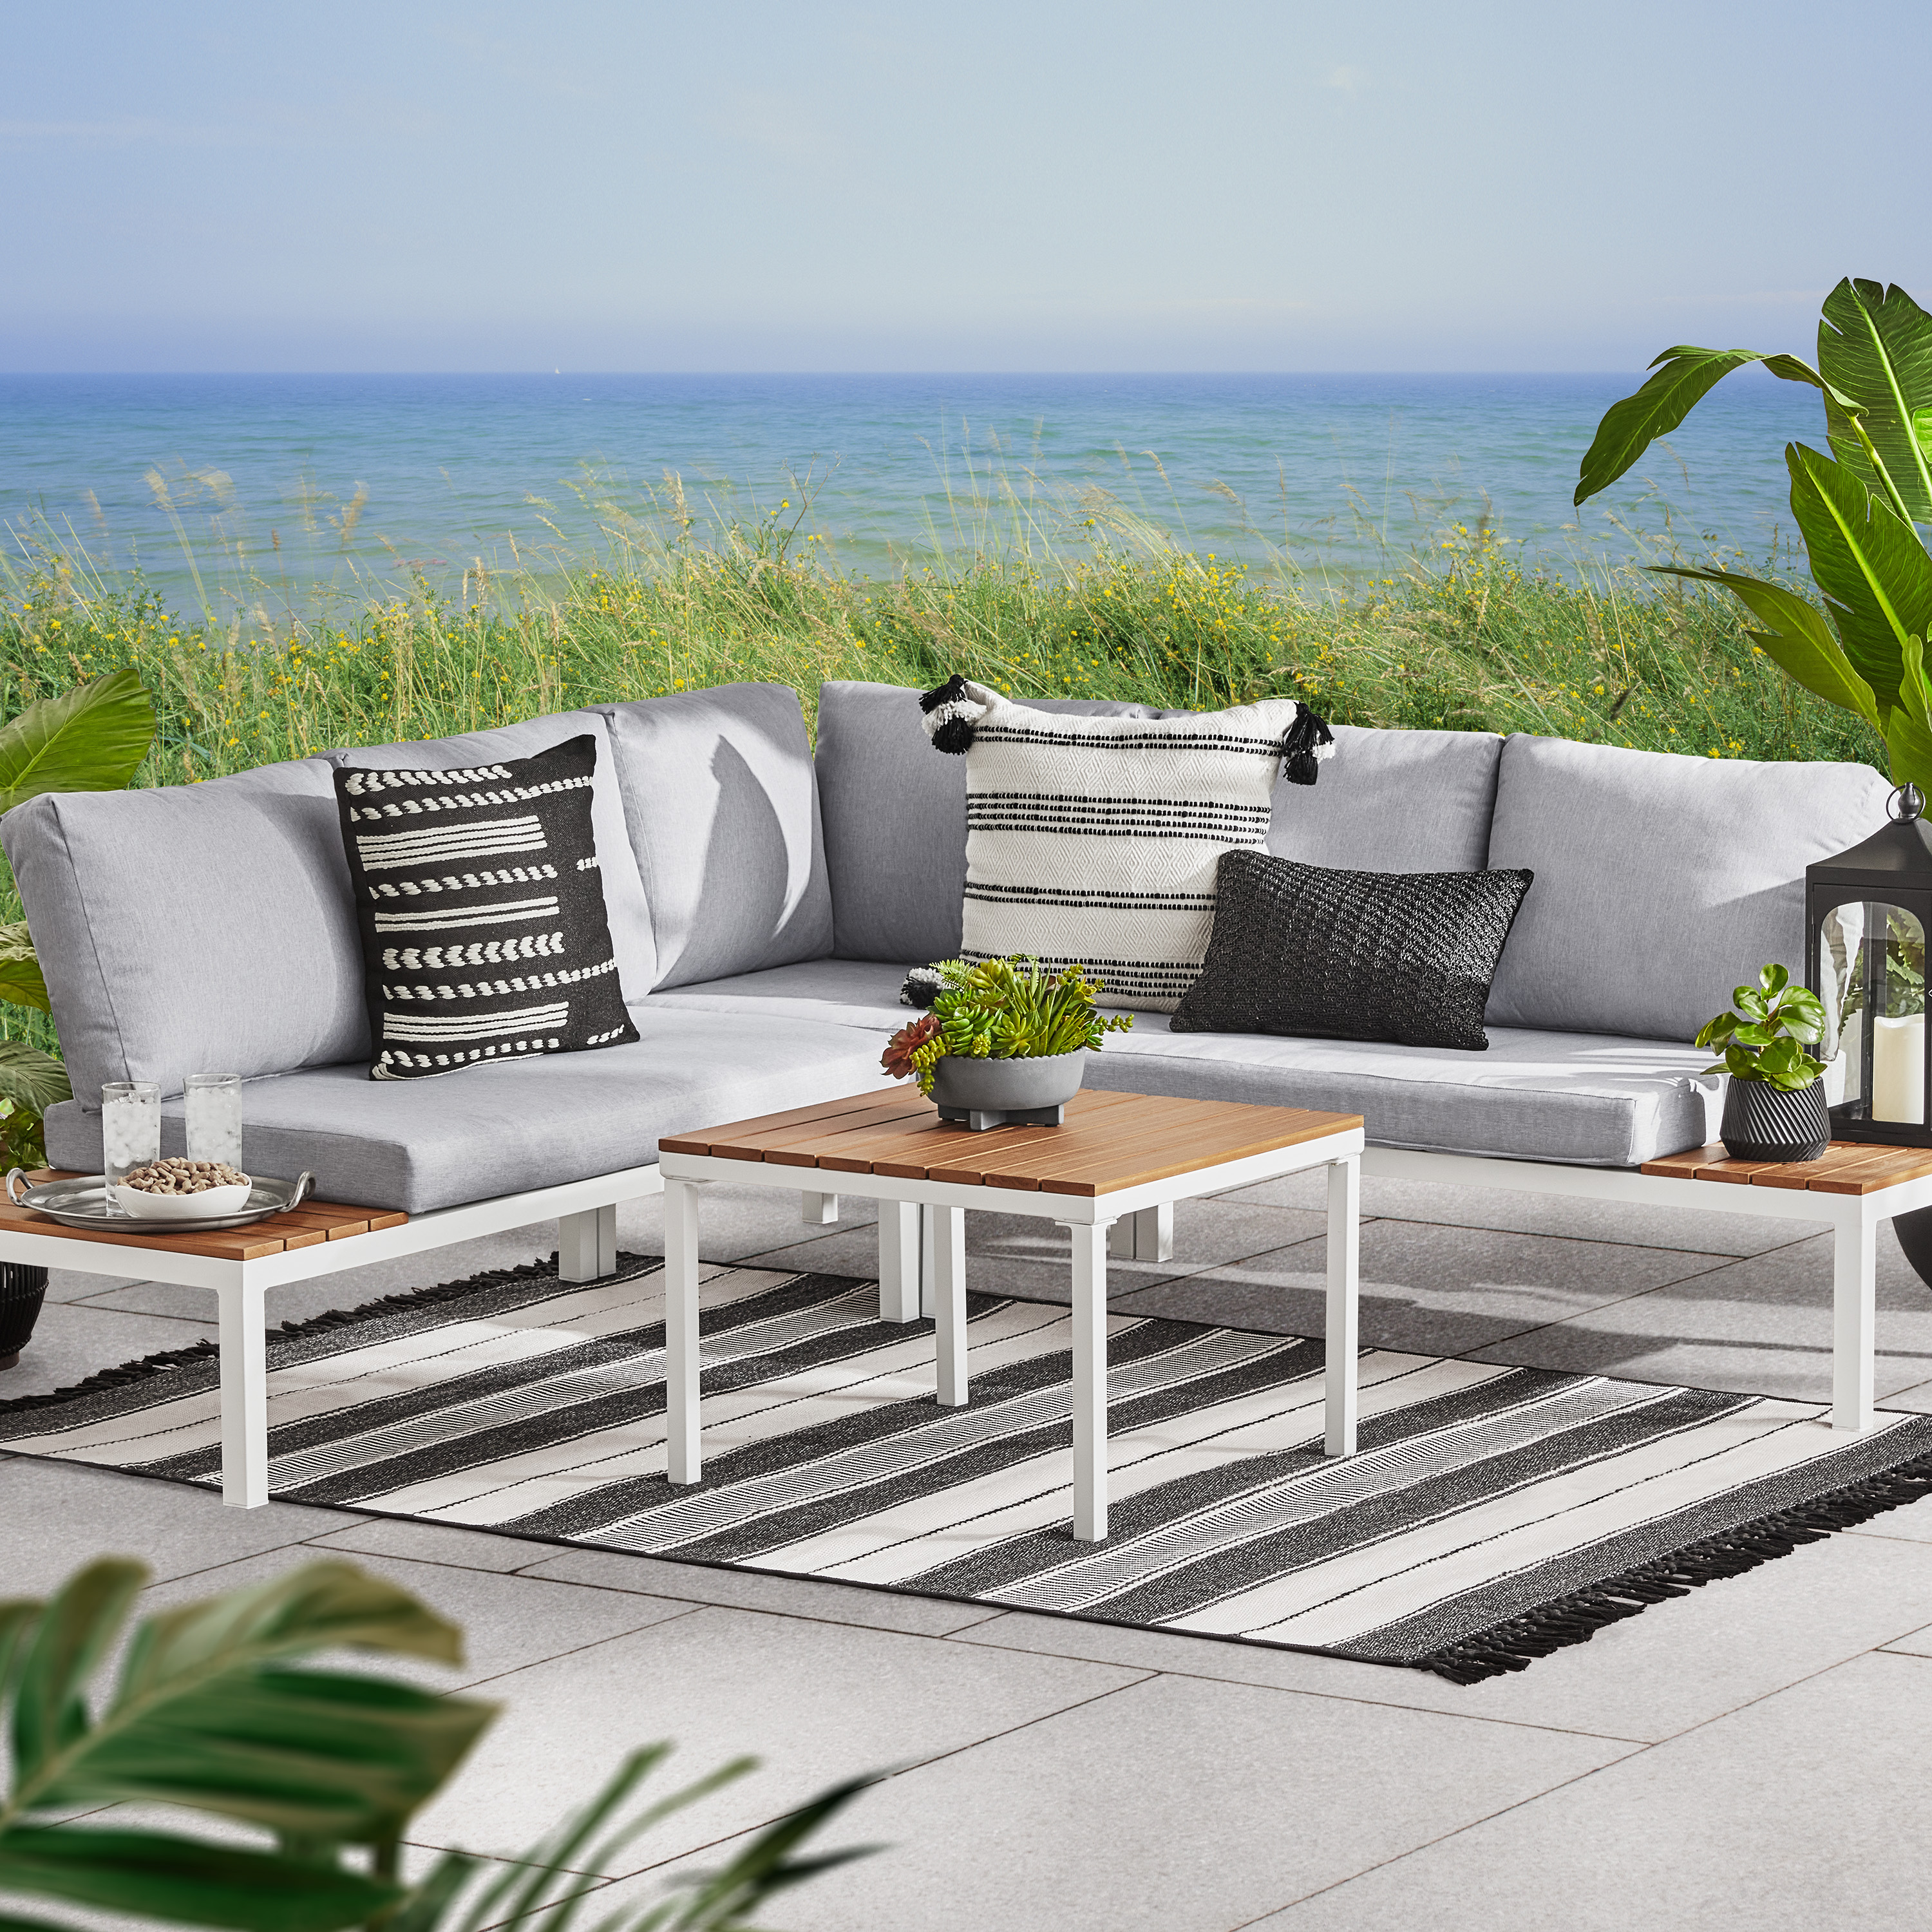 Mainstays Oakleigh 4-Piece Outdoor Chaise Sectional Set with Table, Seats 5, White - image 1 of 10